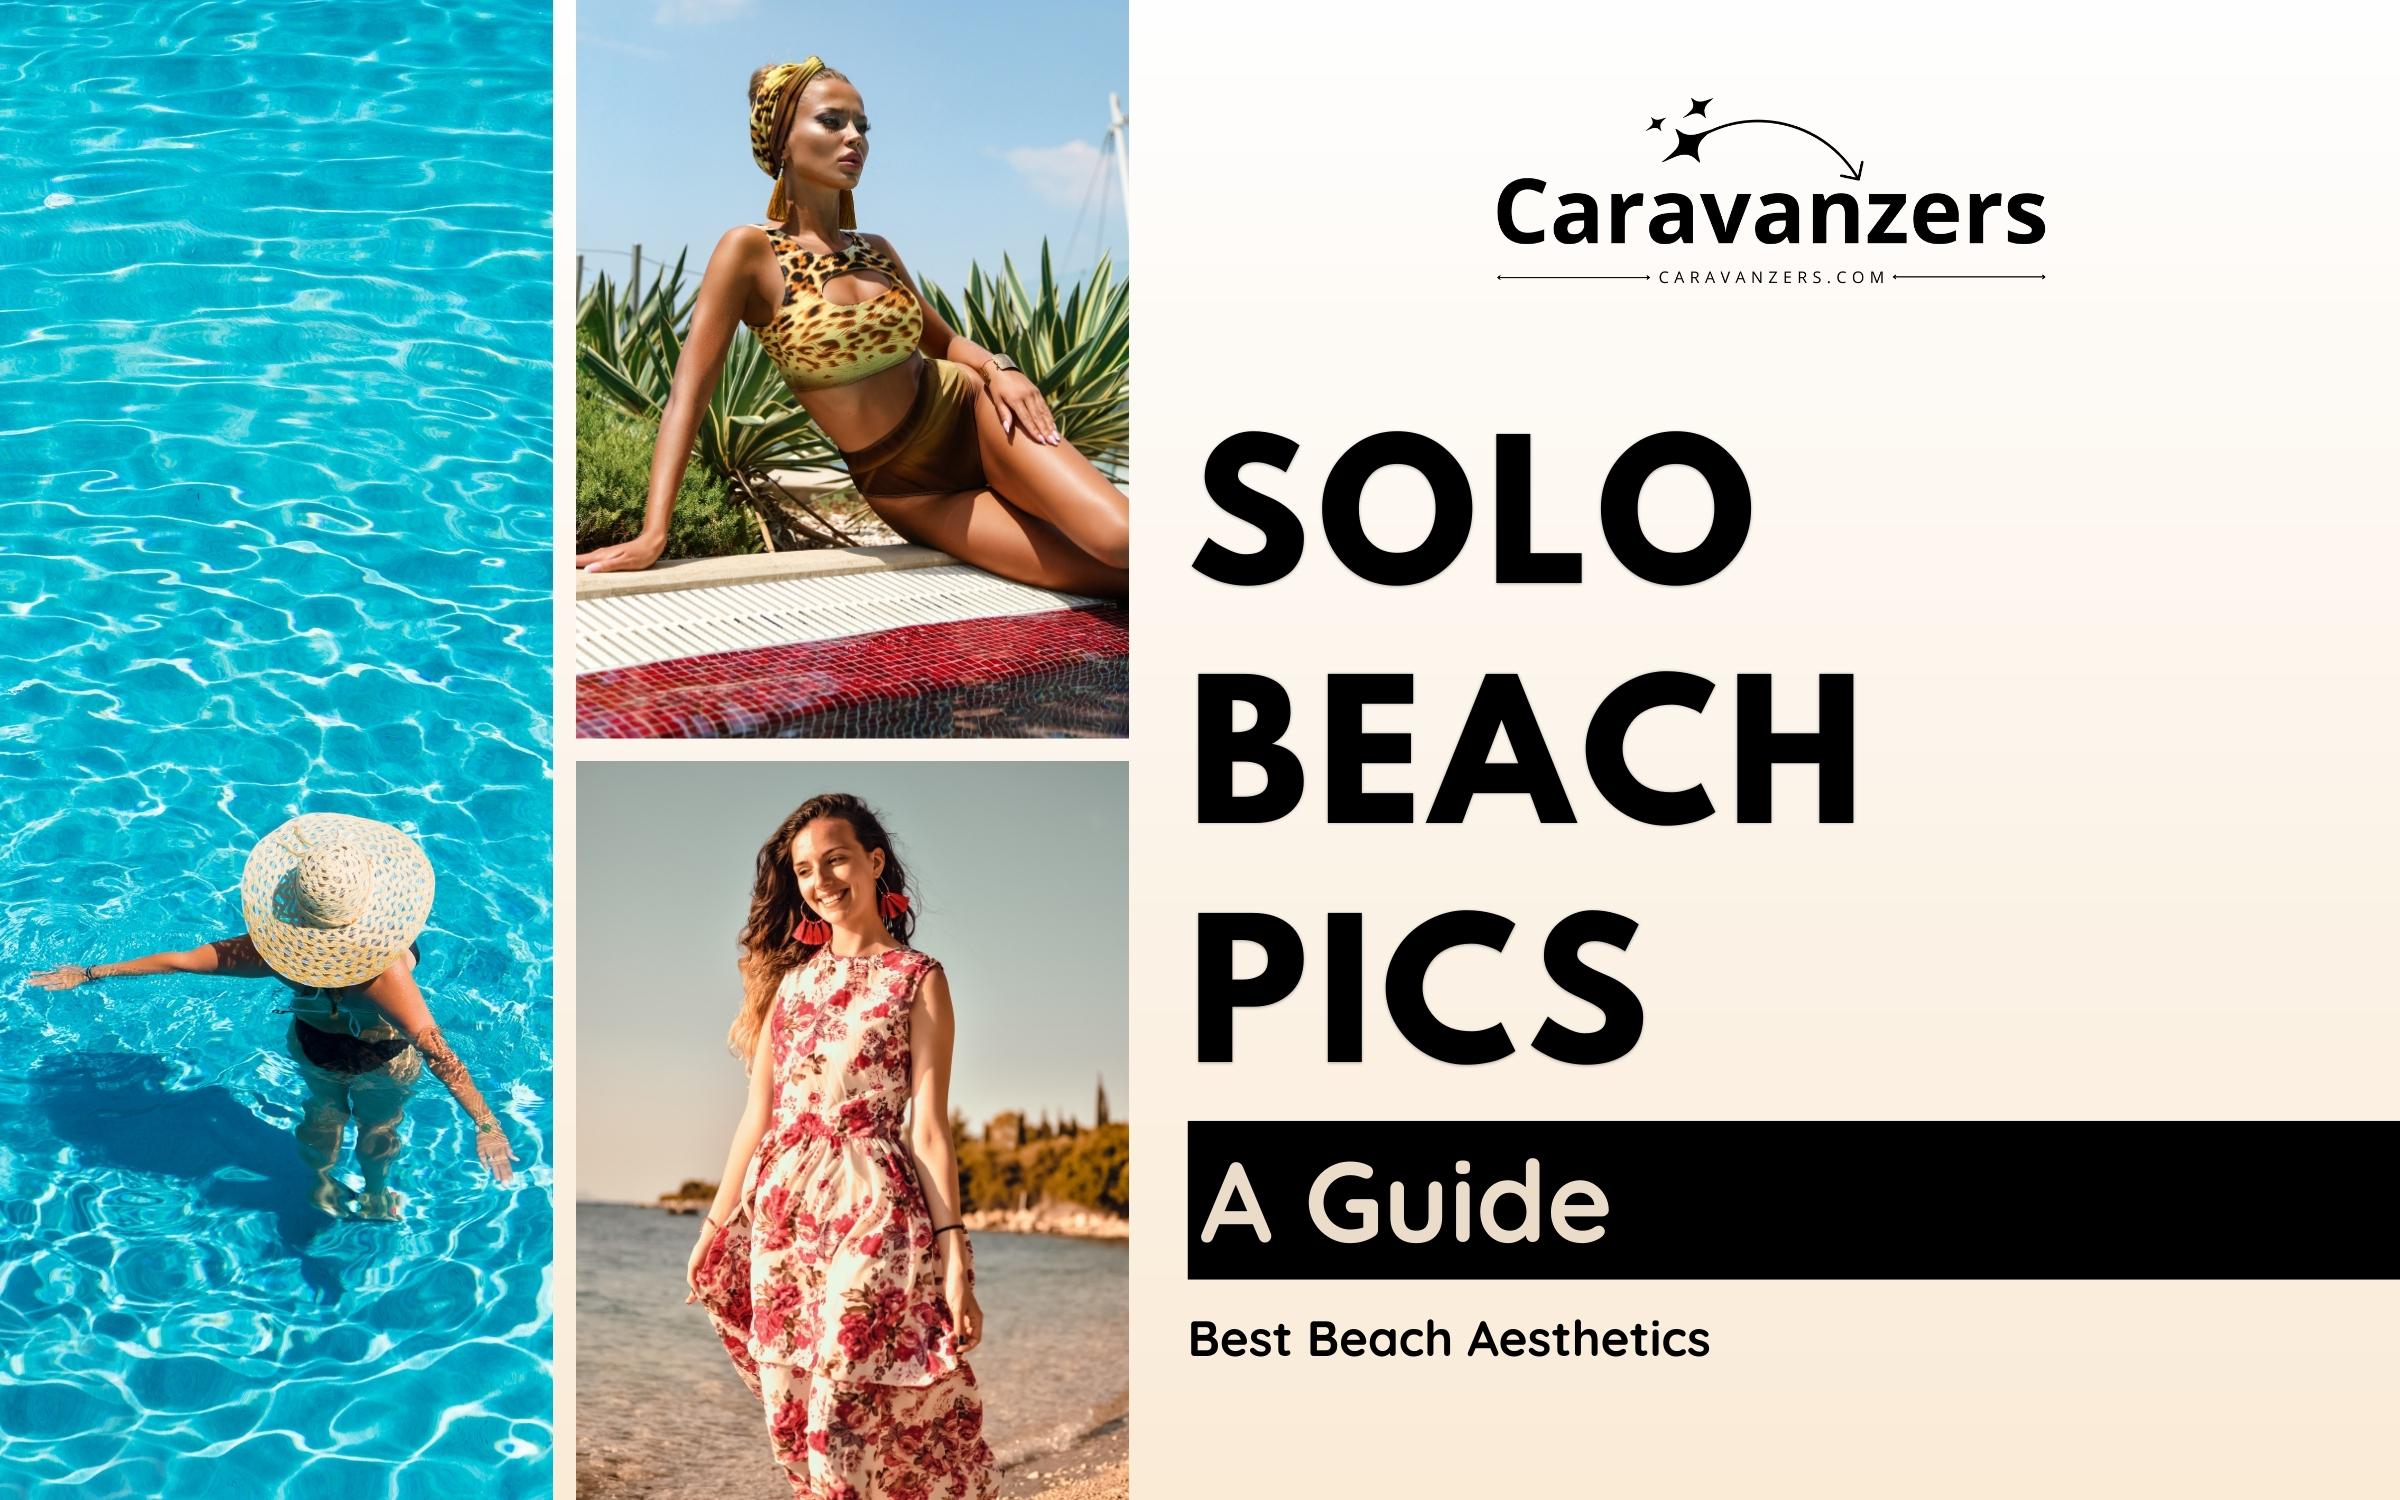 Solo Beach Pics - Guide to Aesthetic, Poses, and More